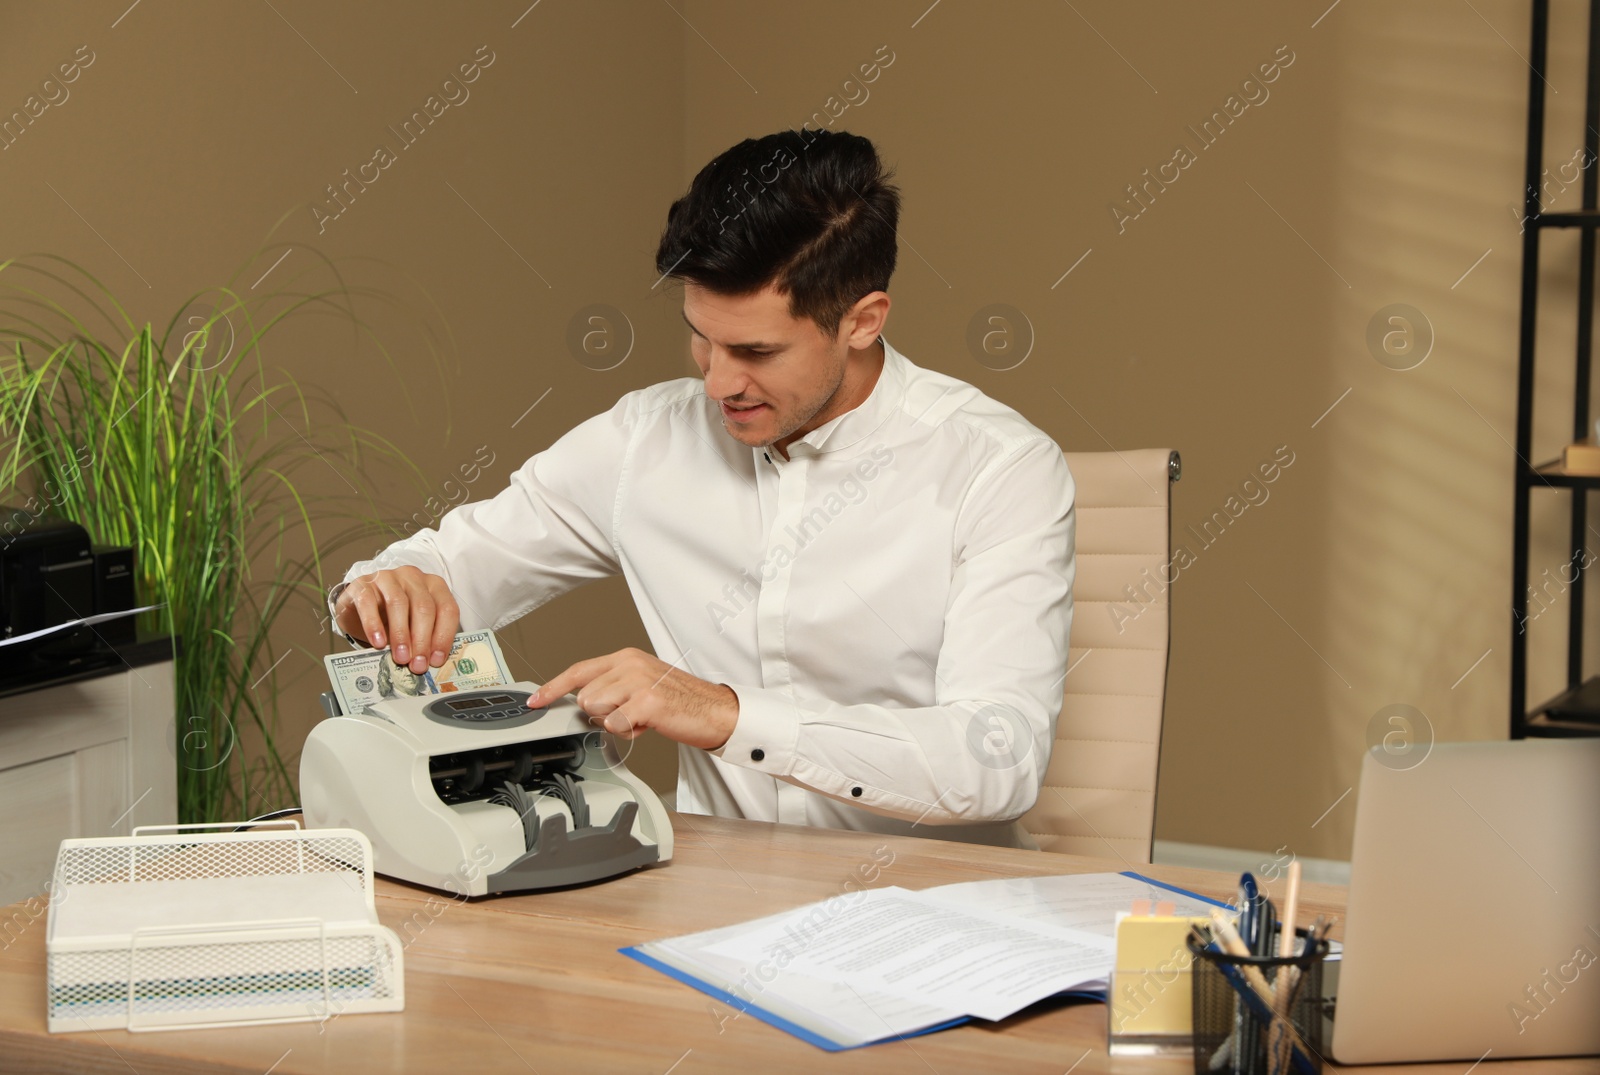 Photo of Man putting money into banknote counter at wooden table indoors